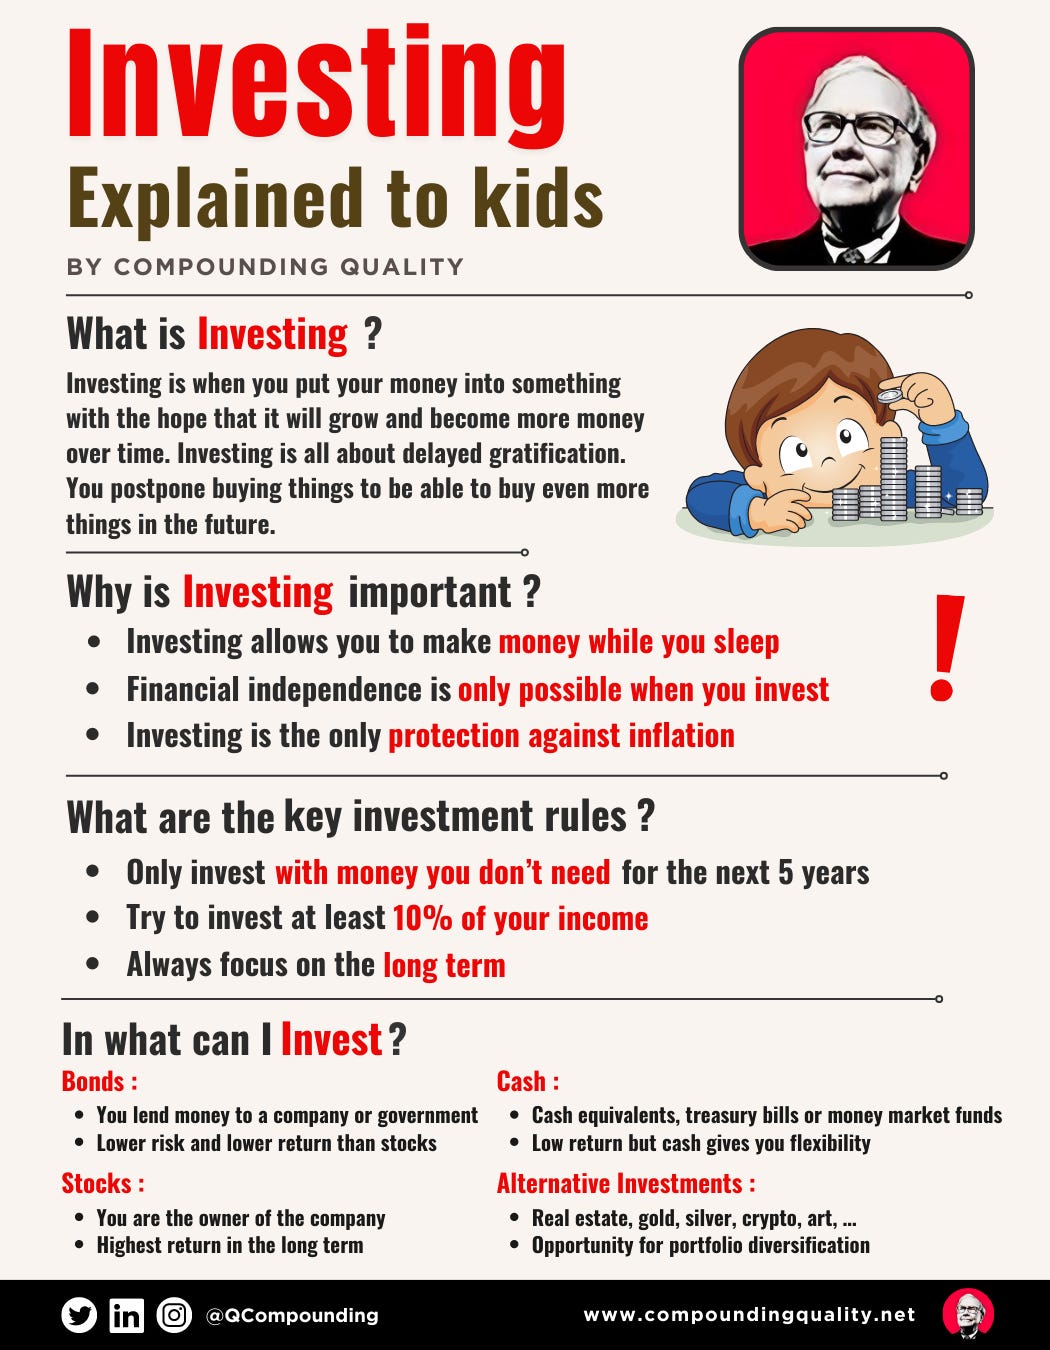 🏰 Investing explained to kids - Compounding Quality